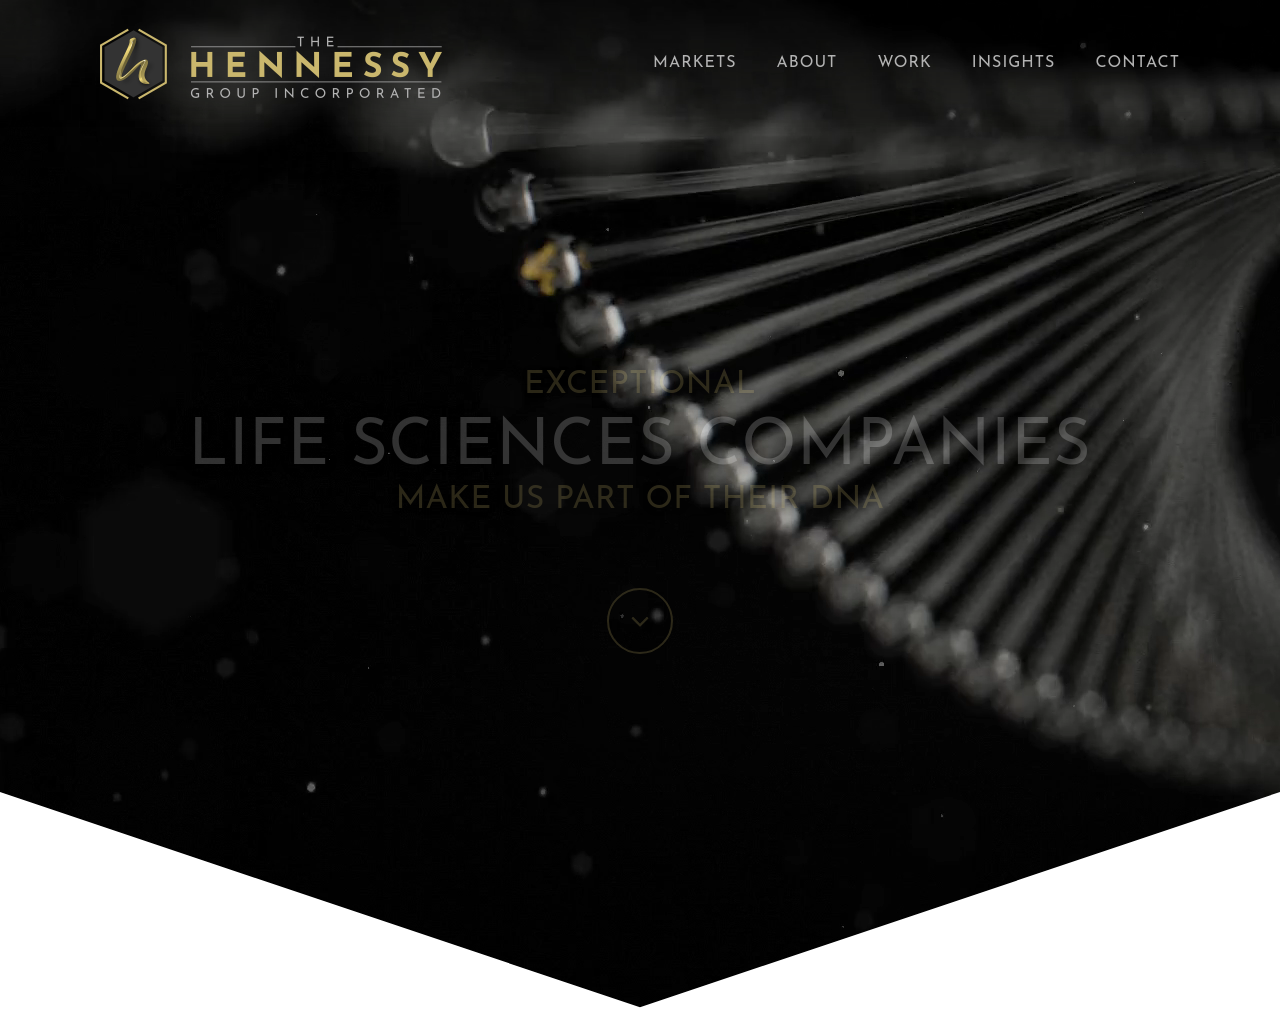 thehennessygroup.com